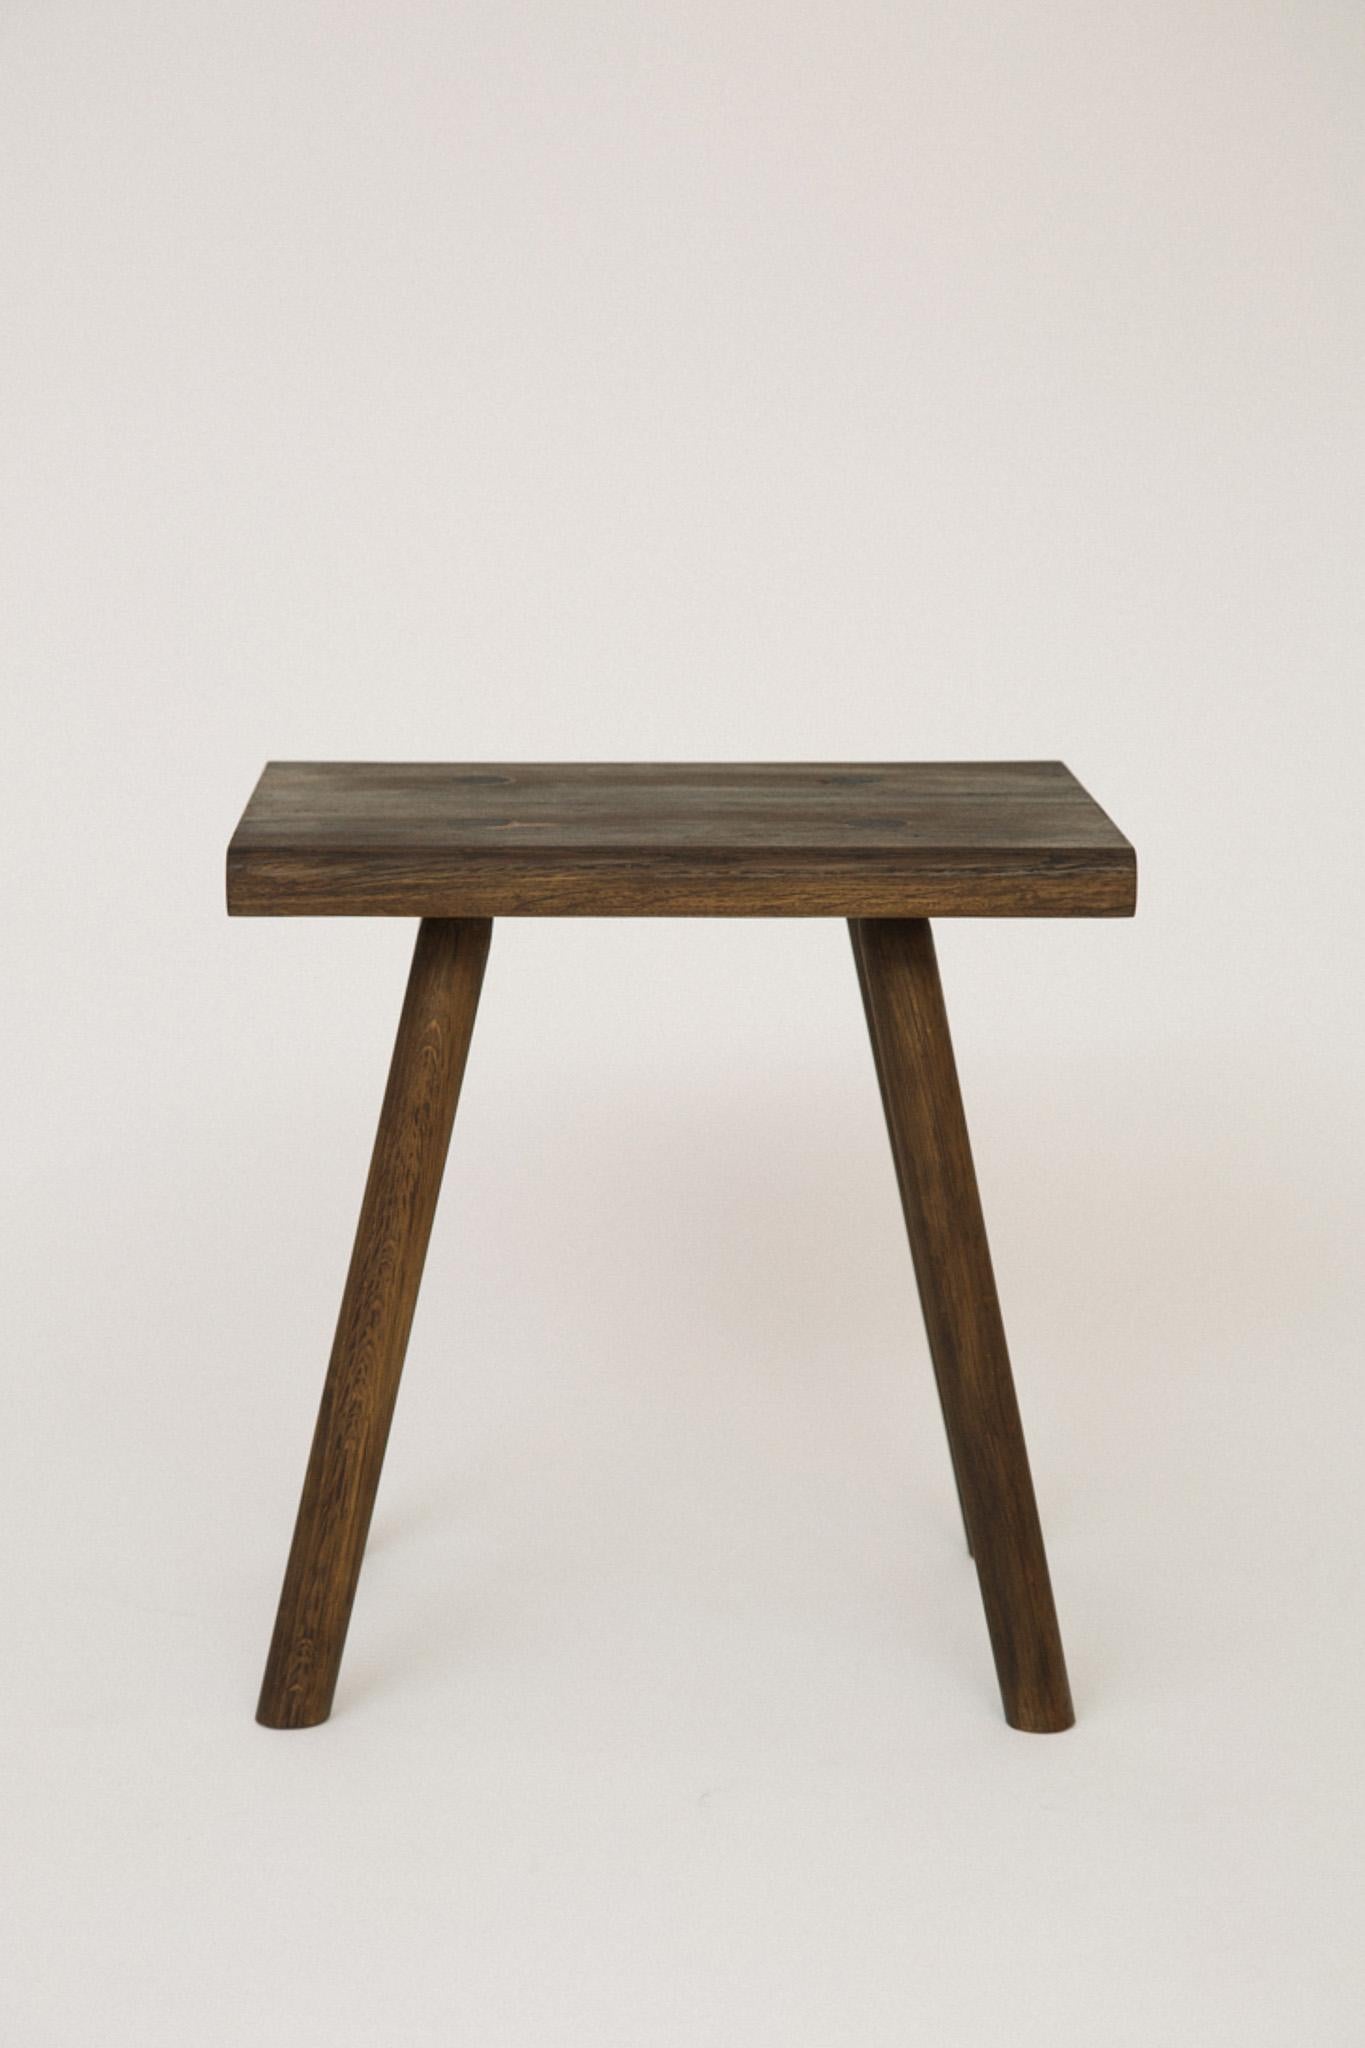 This beautiful English Oak stool and side table is perfect for any room of the house. The ideal height as a stool for seating, or equally useful as a side table and bedside table.
Turned a fantastically rich brown through the traditional proccess of